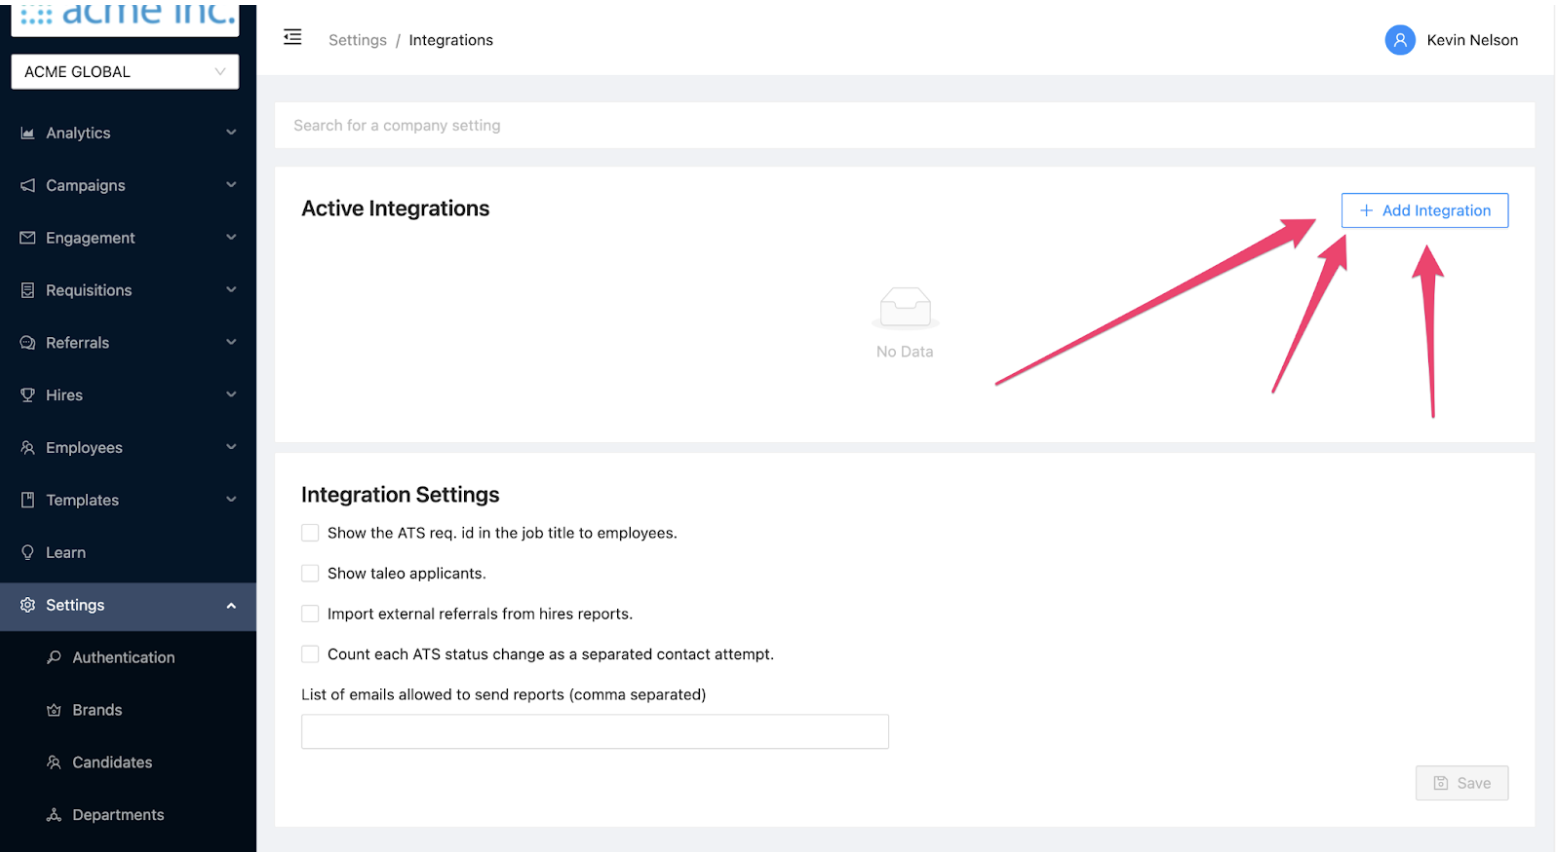 Arrows pointing to Add Integration button on integration settings page